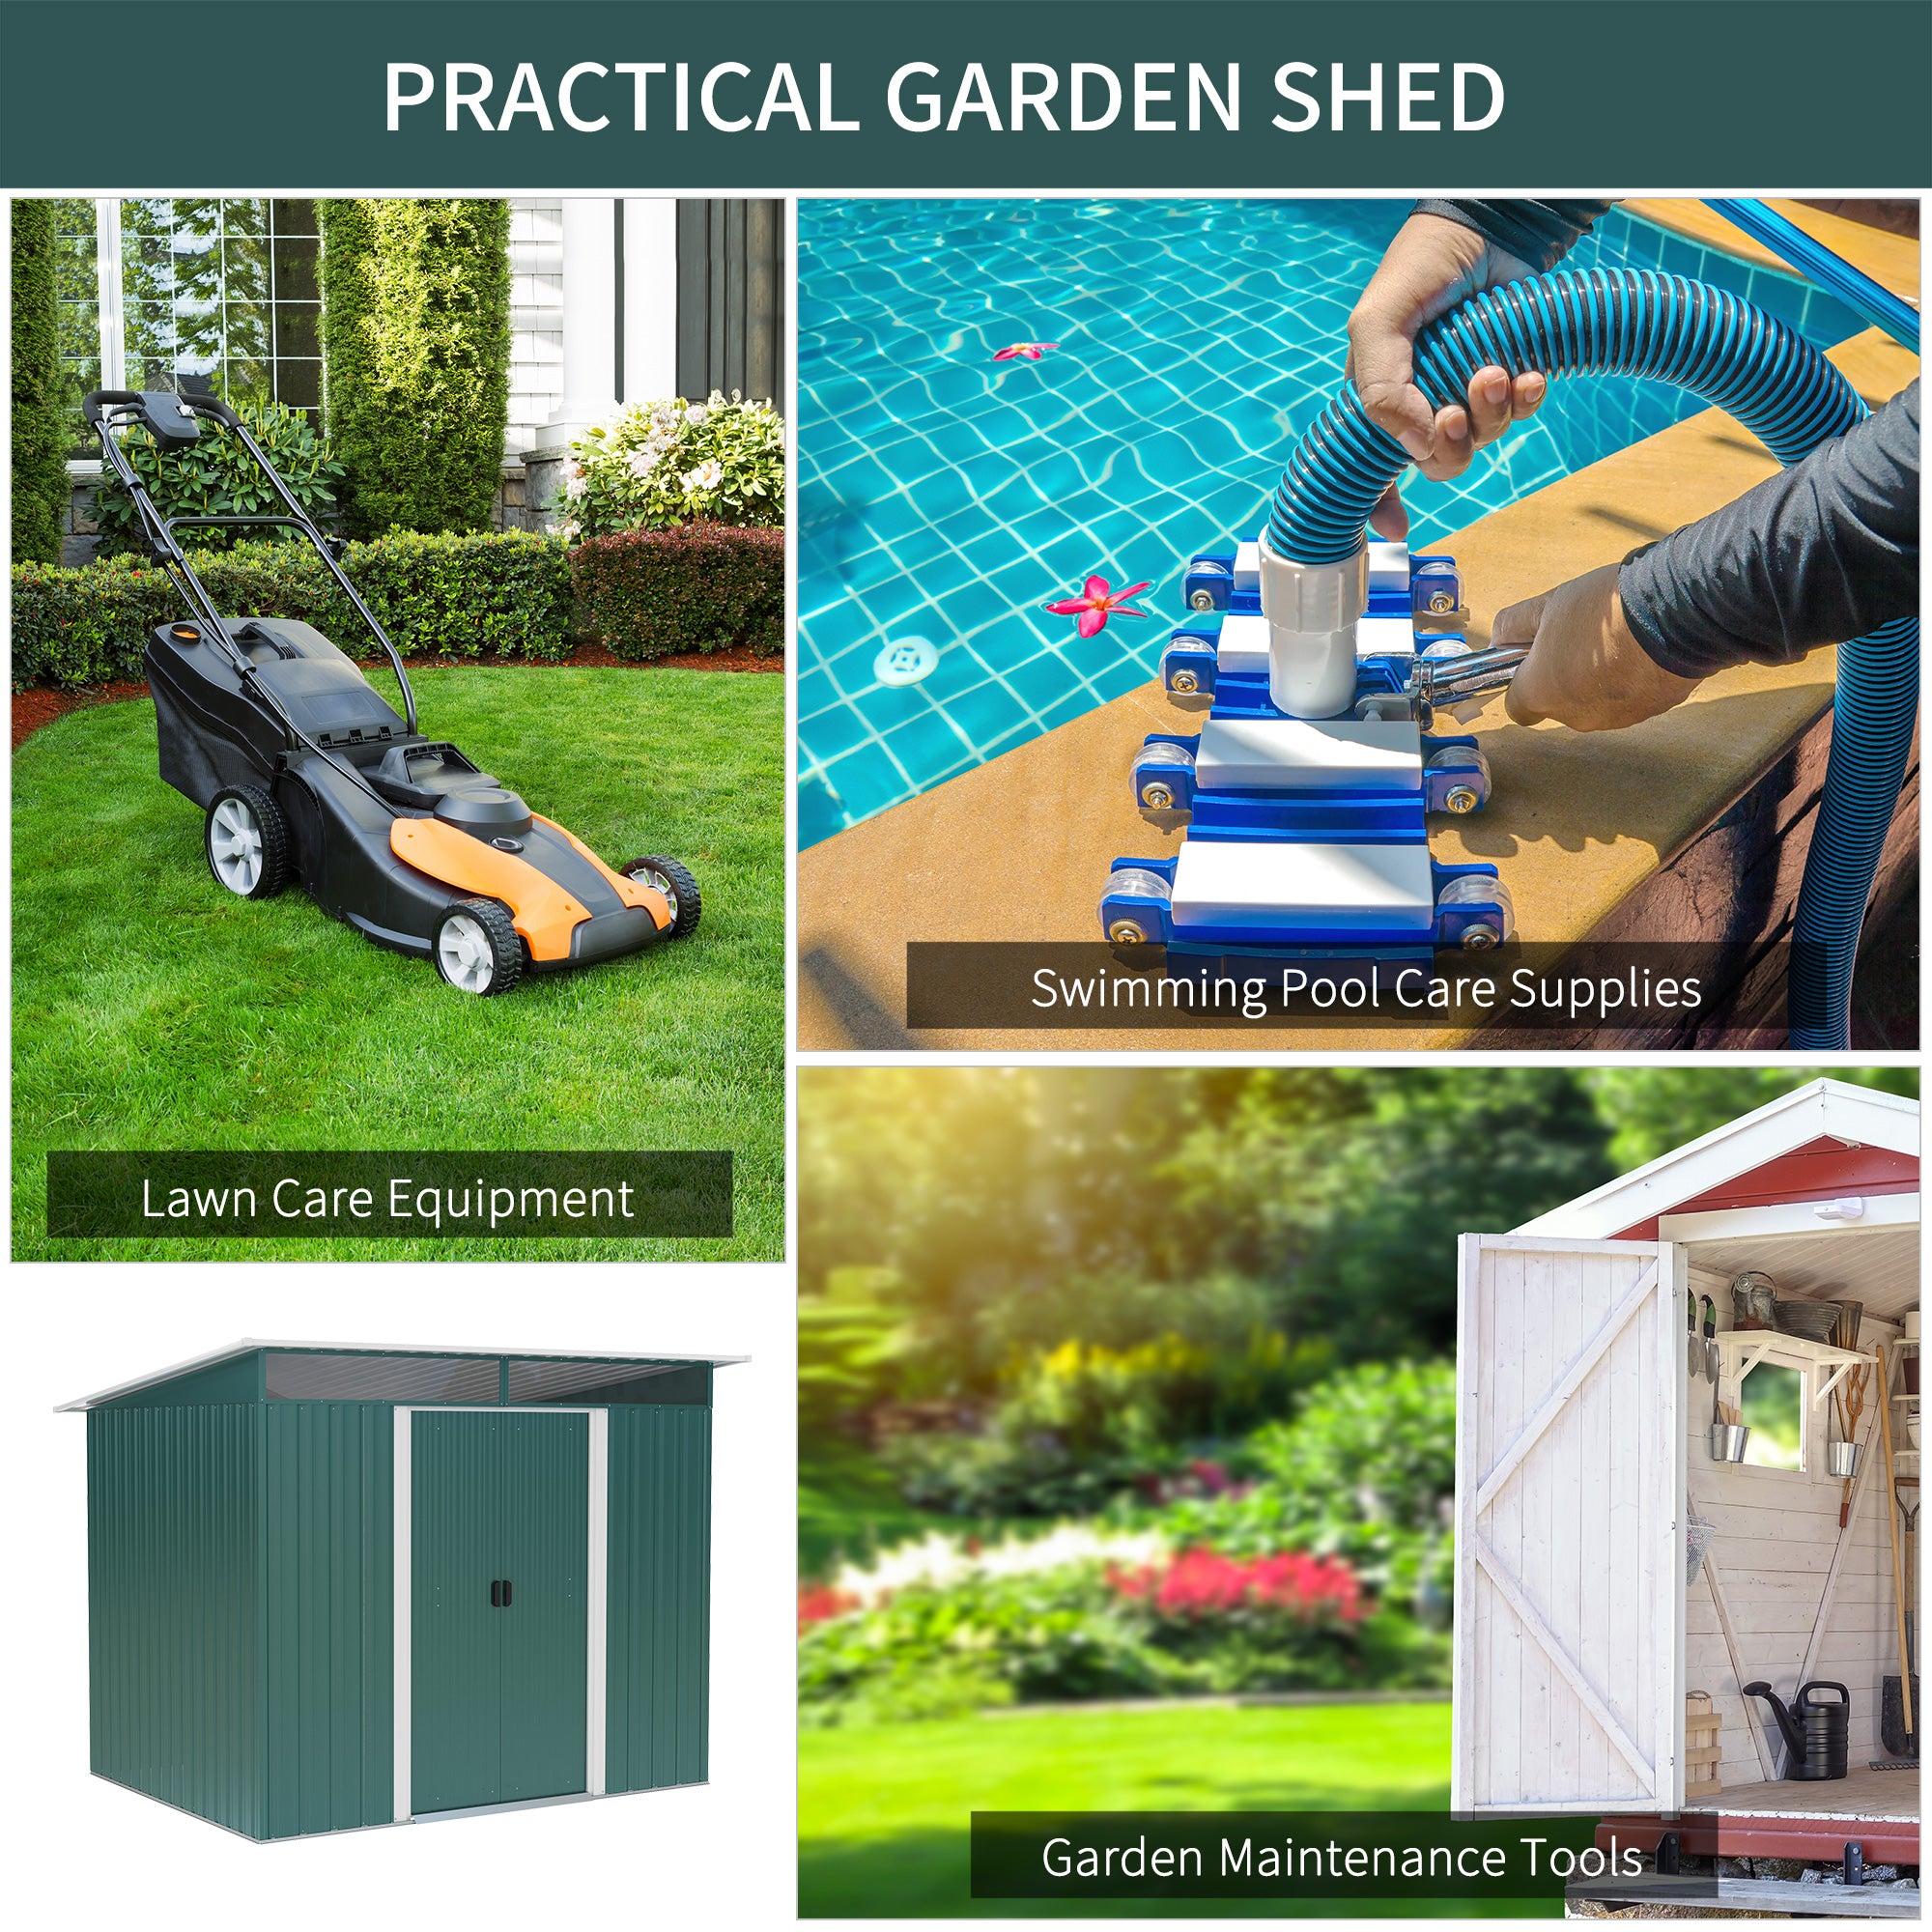 Outsunny Pent Roofed Metal Garden Shed House Hut Gardening Tool Storage w/ Ventilation 260L x 194W x 200H cm - Inspirely